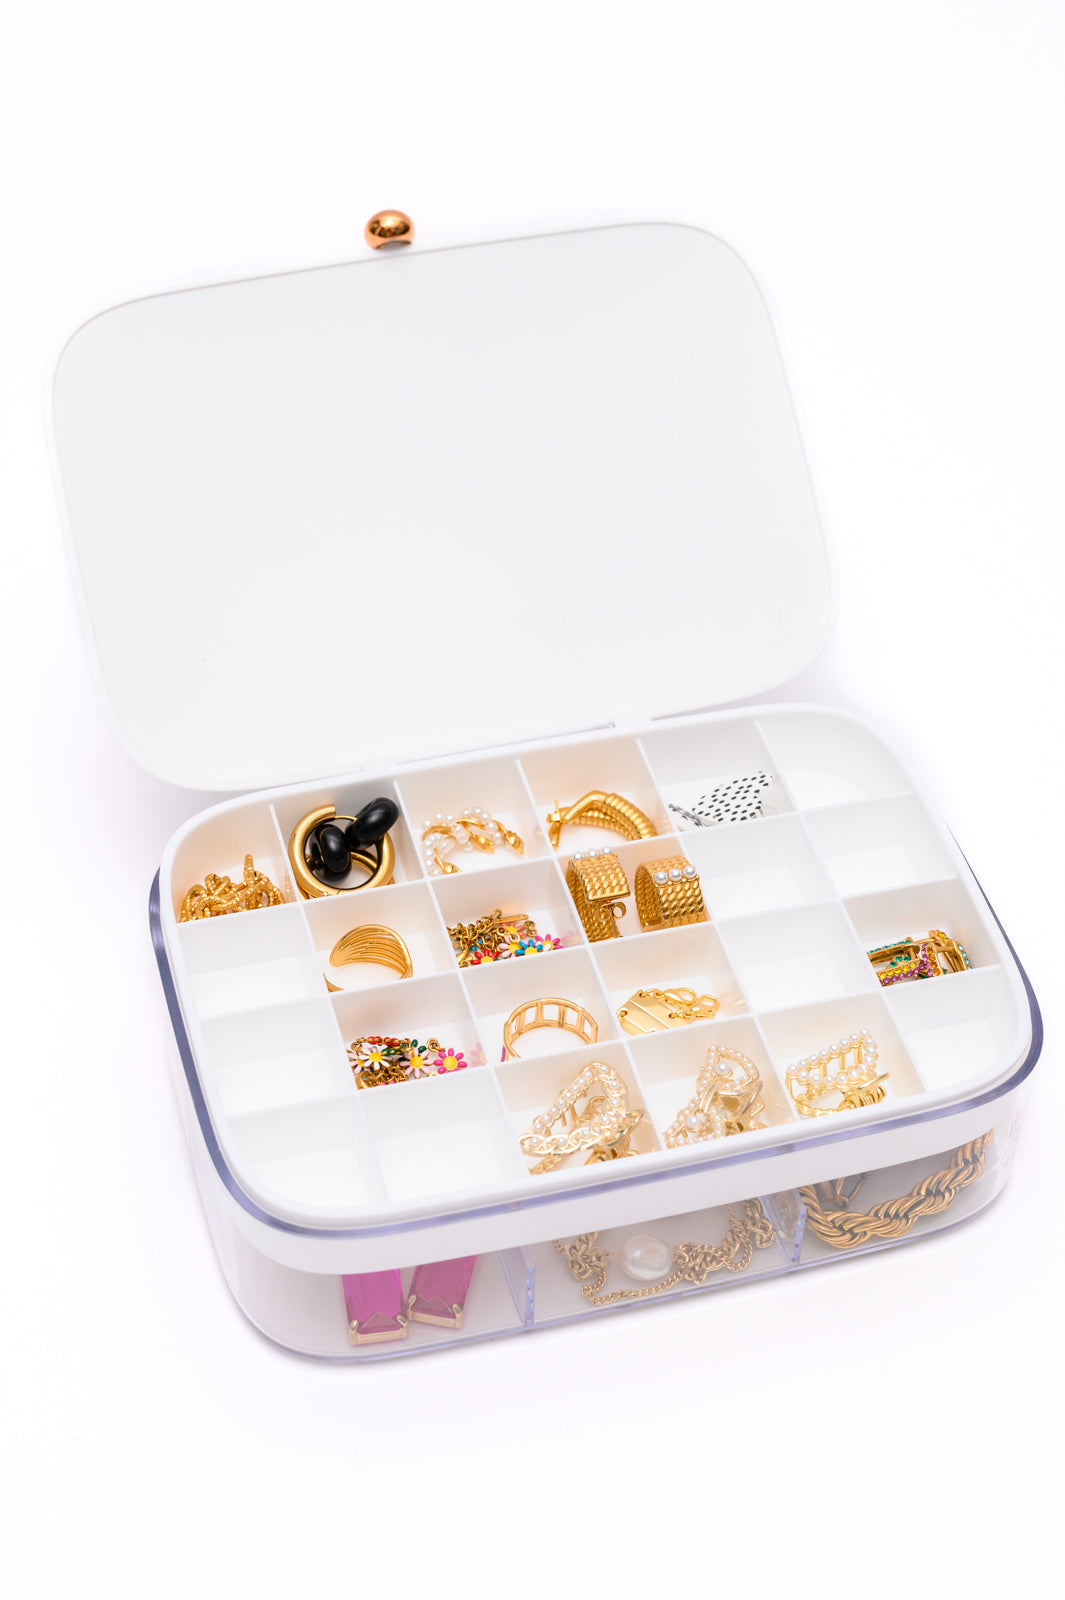 All Sorted Out Jewelry Storage Case in White